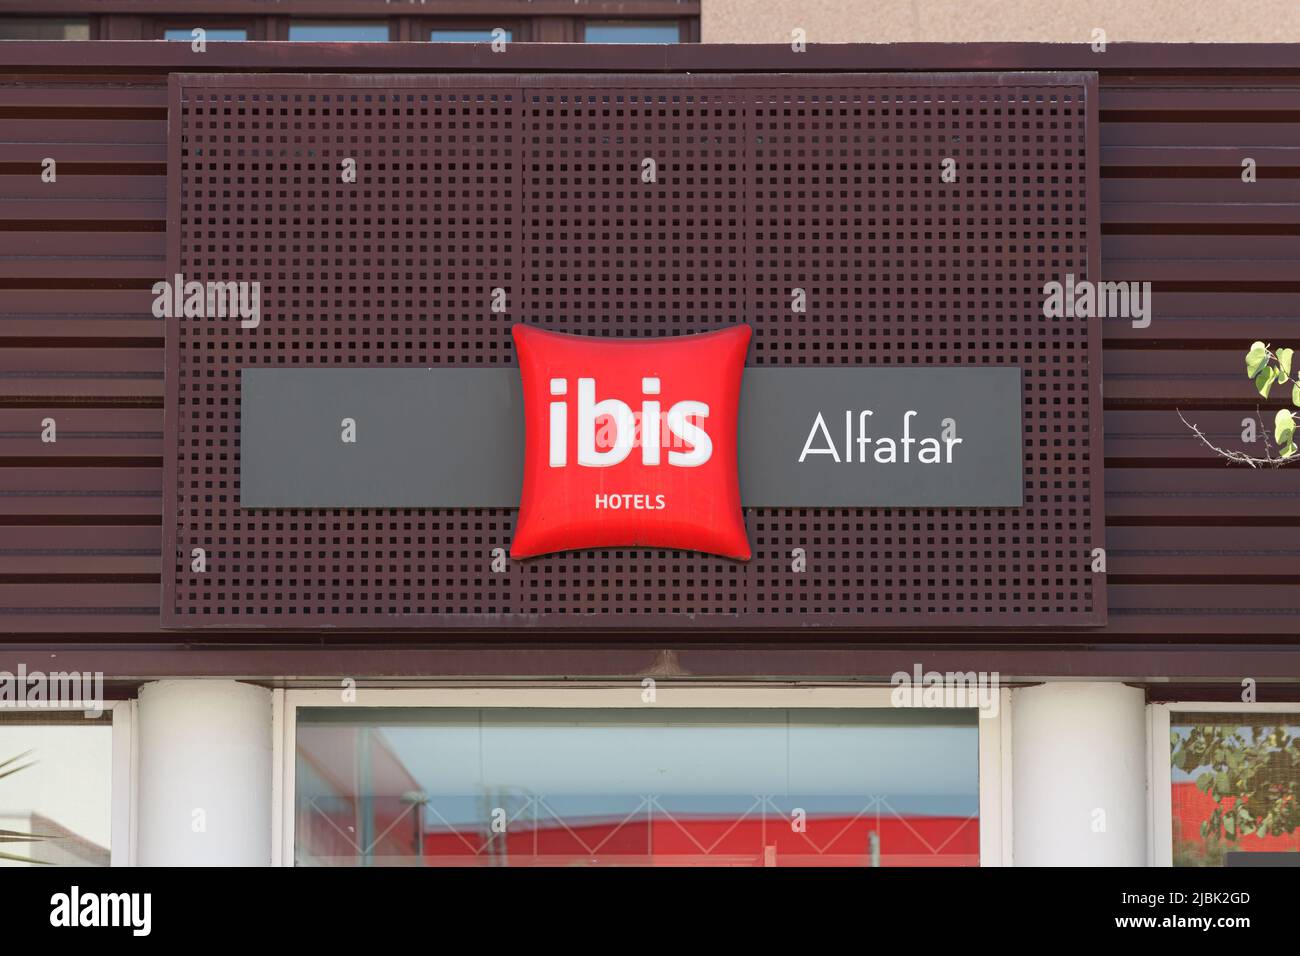 ALFAFAR, SPAIN - JUNE 06, 2022: Ibis is a French brand of economy hotels owned by Accor Stock Photo